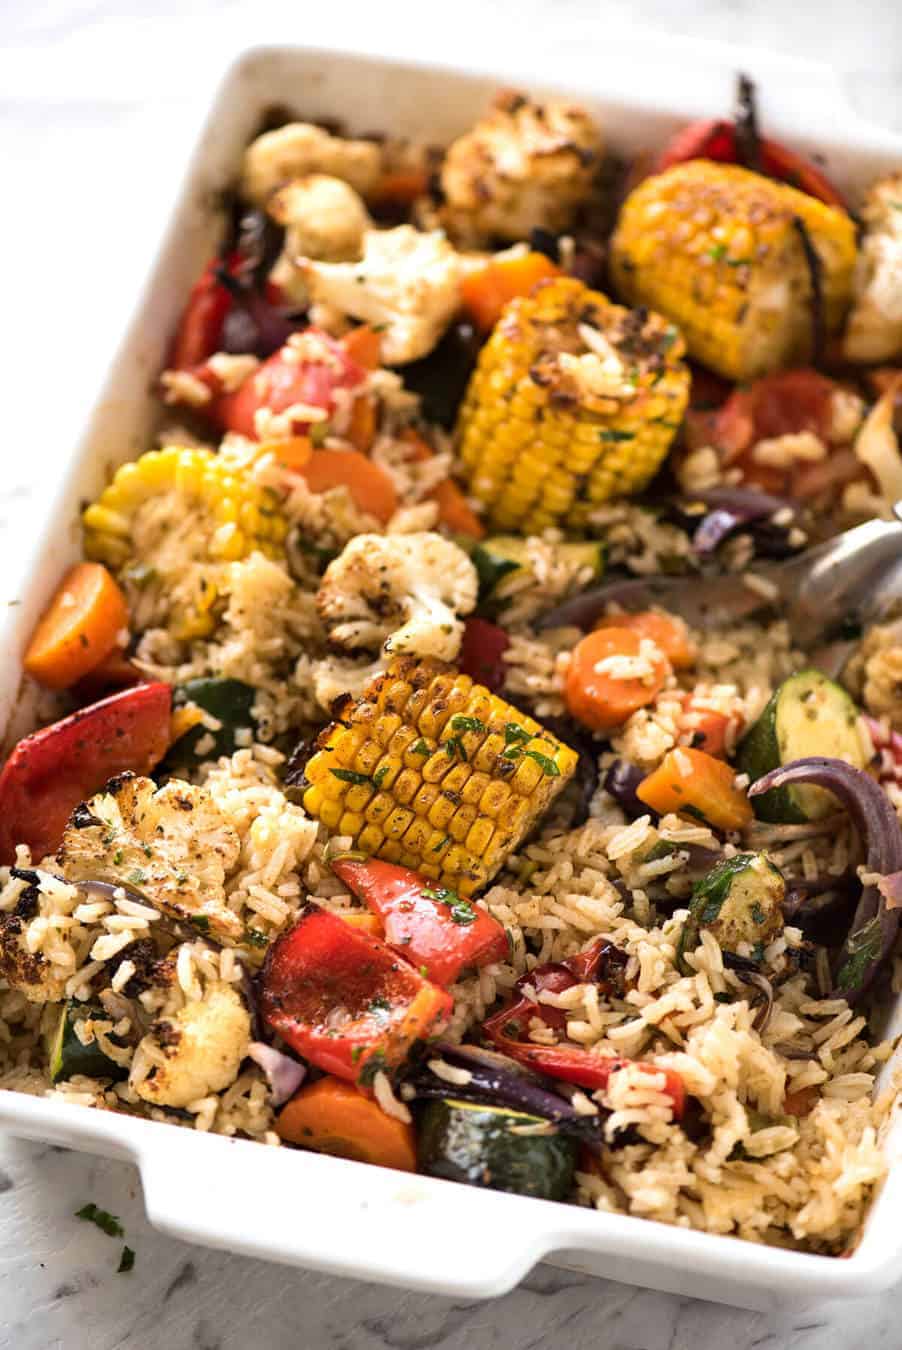 Oven Baked Rice and Vegetables - Fluffy seasoned rice and oven roasted vegetables, all made in ONE pan! Fabulous meal or side, super quick and easy to prep. recipetineats.com